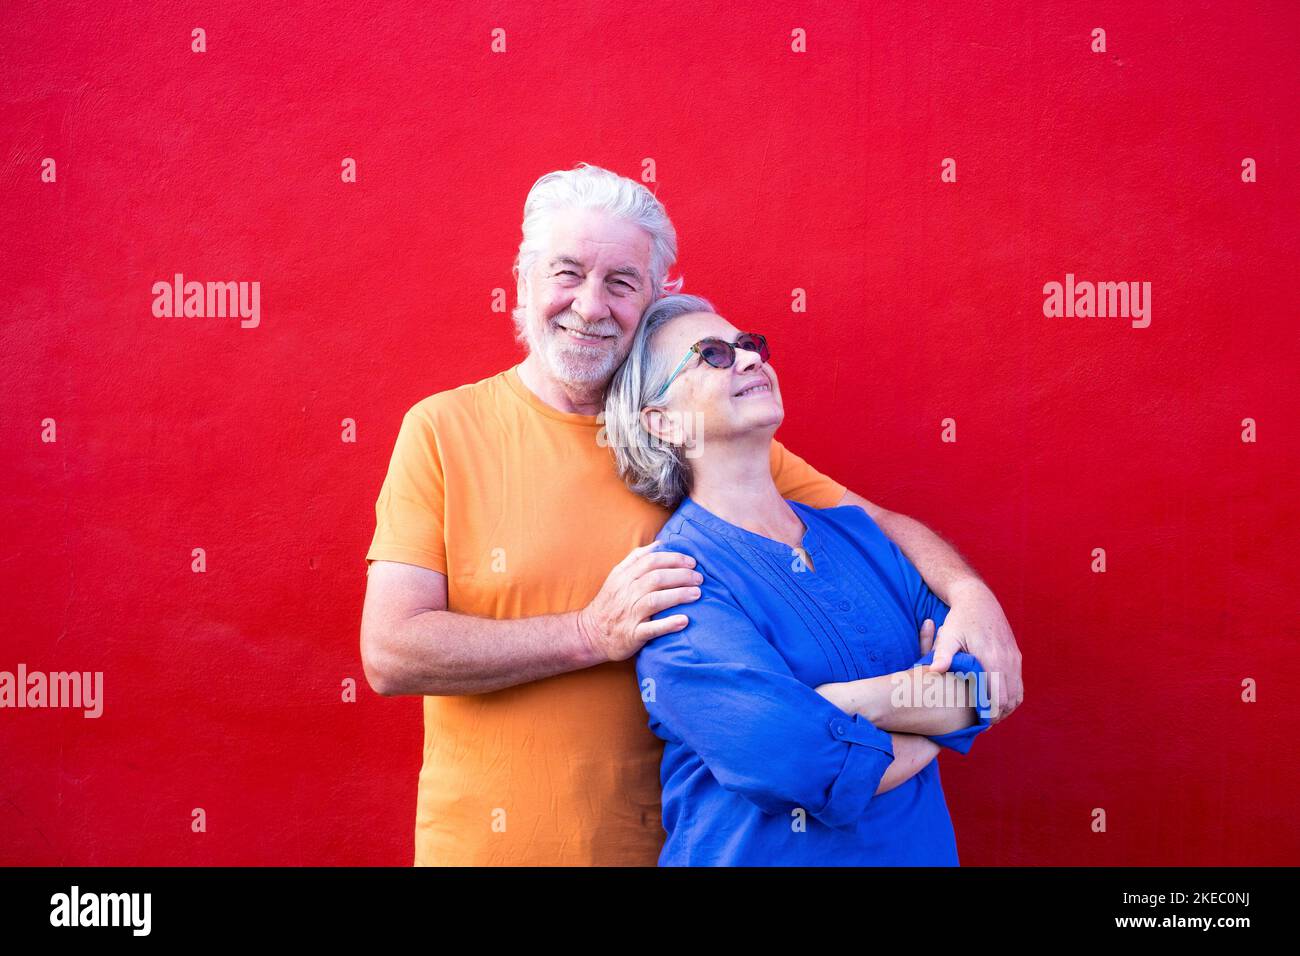 couple of seniors having fun together and smiling - mature man looking at the camera and hugging his wife - red background - portrait sand close up Stock Photo